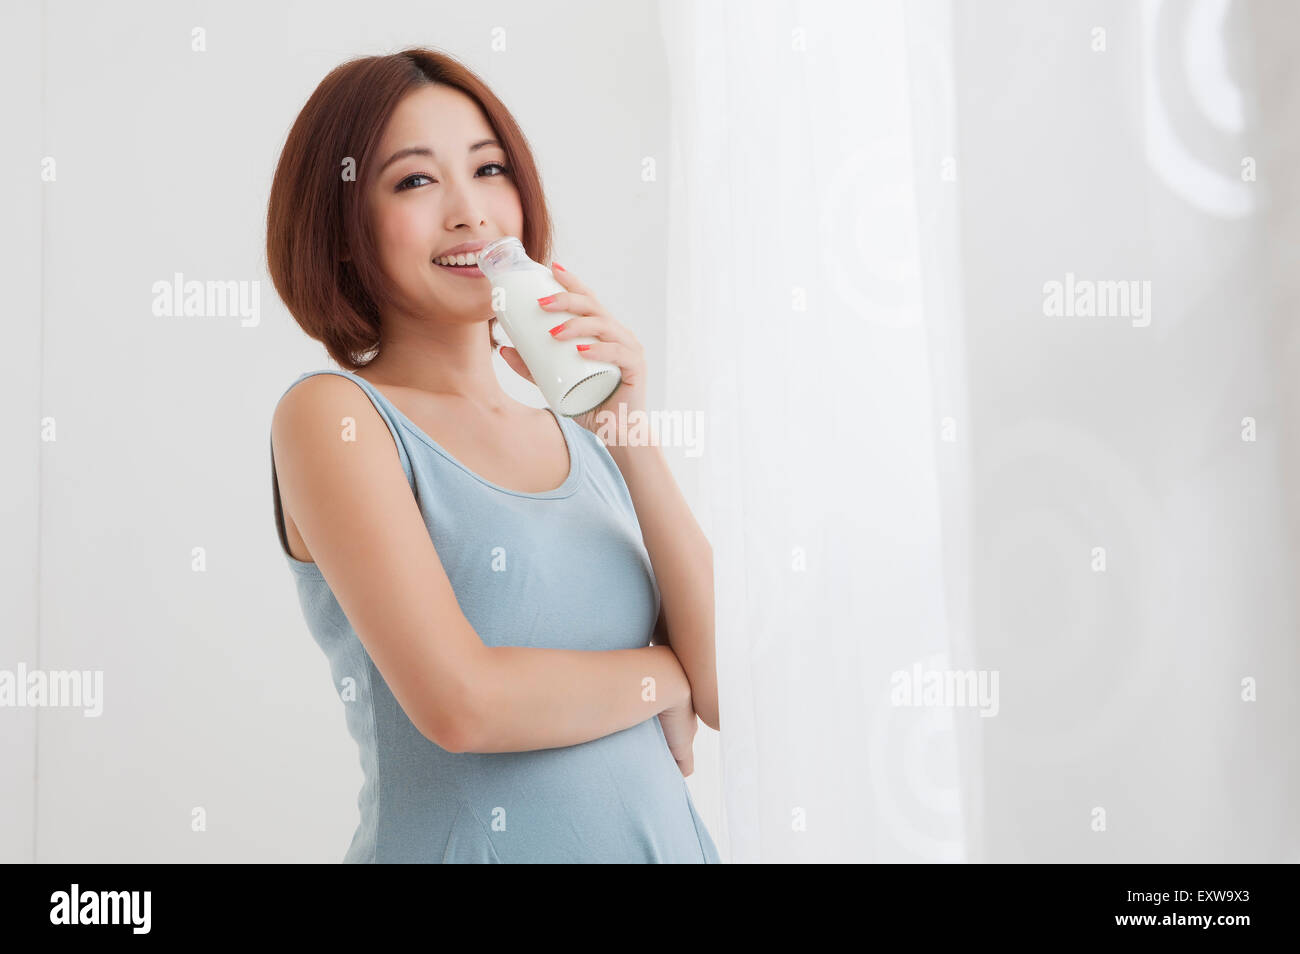 Young woman holding a bottle of milk and smiling at the camera, Stock Photo